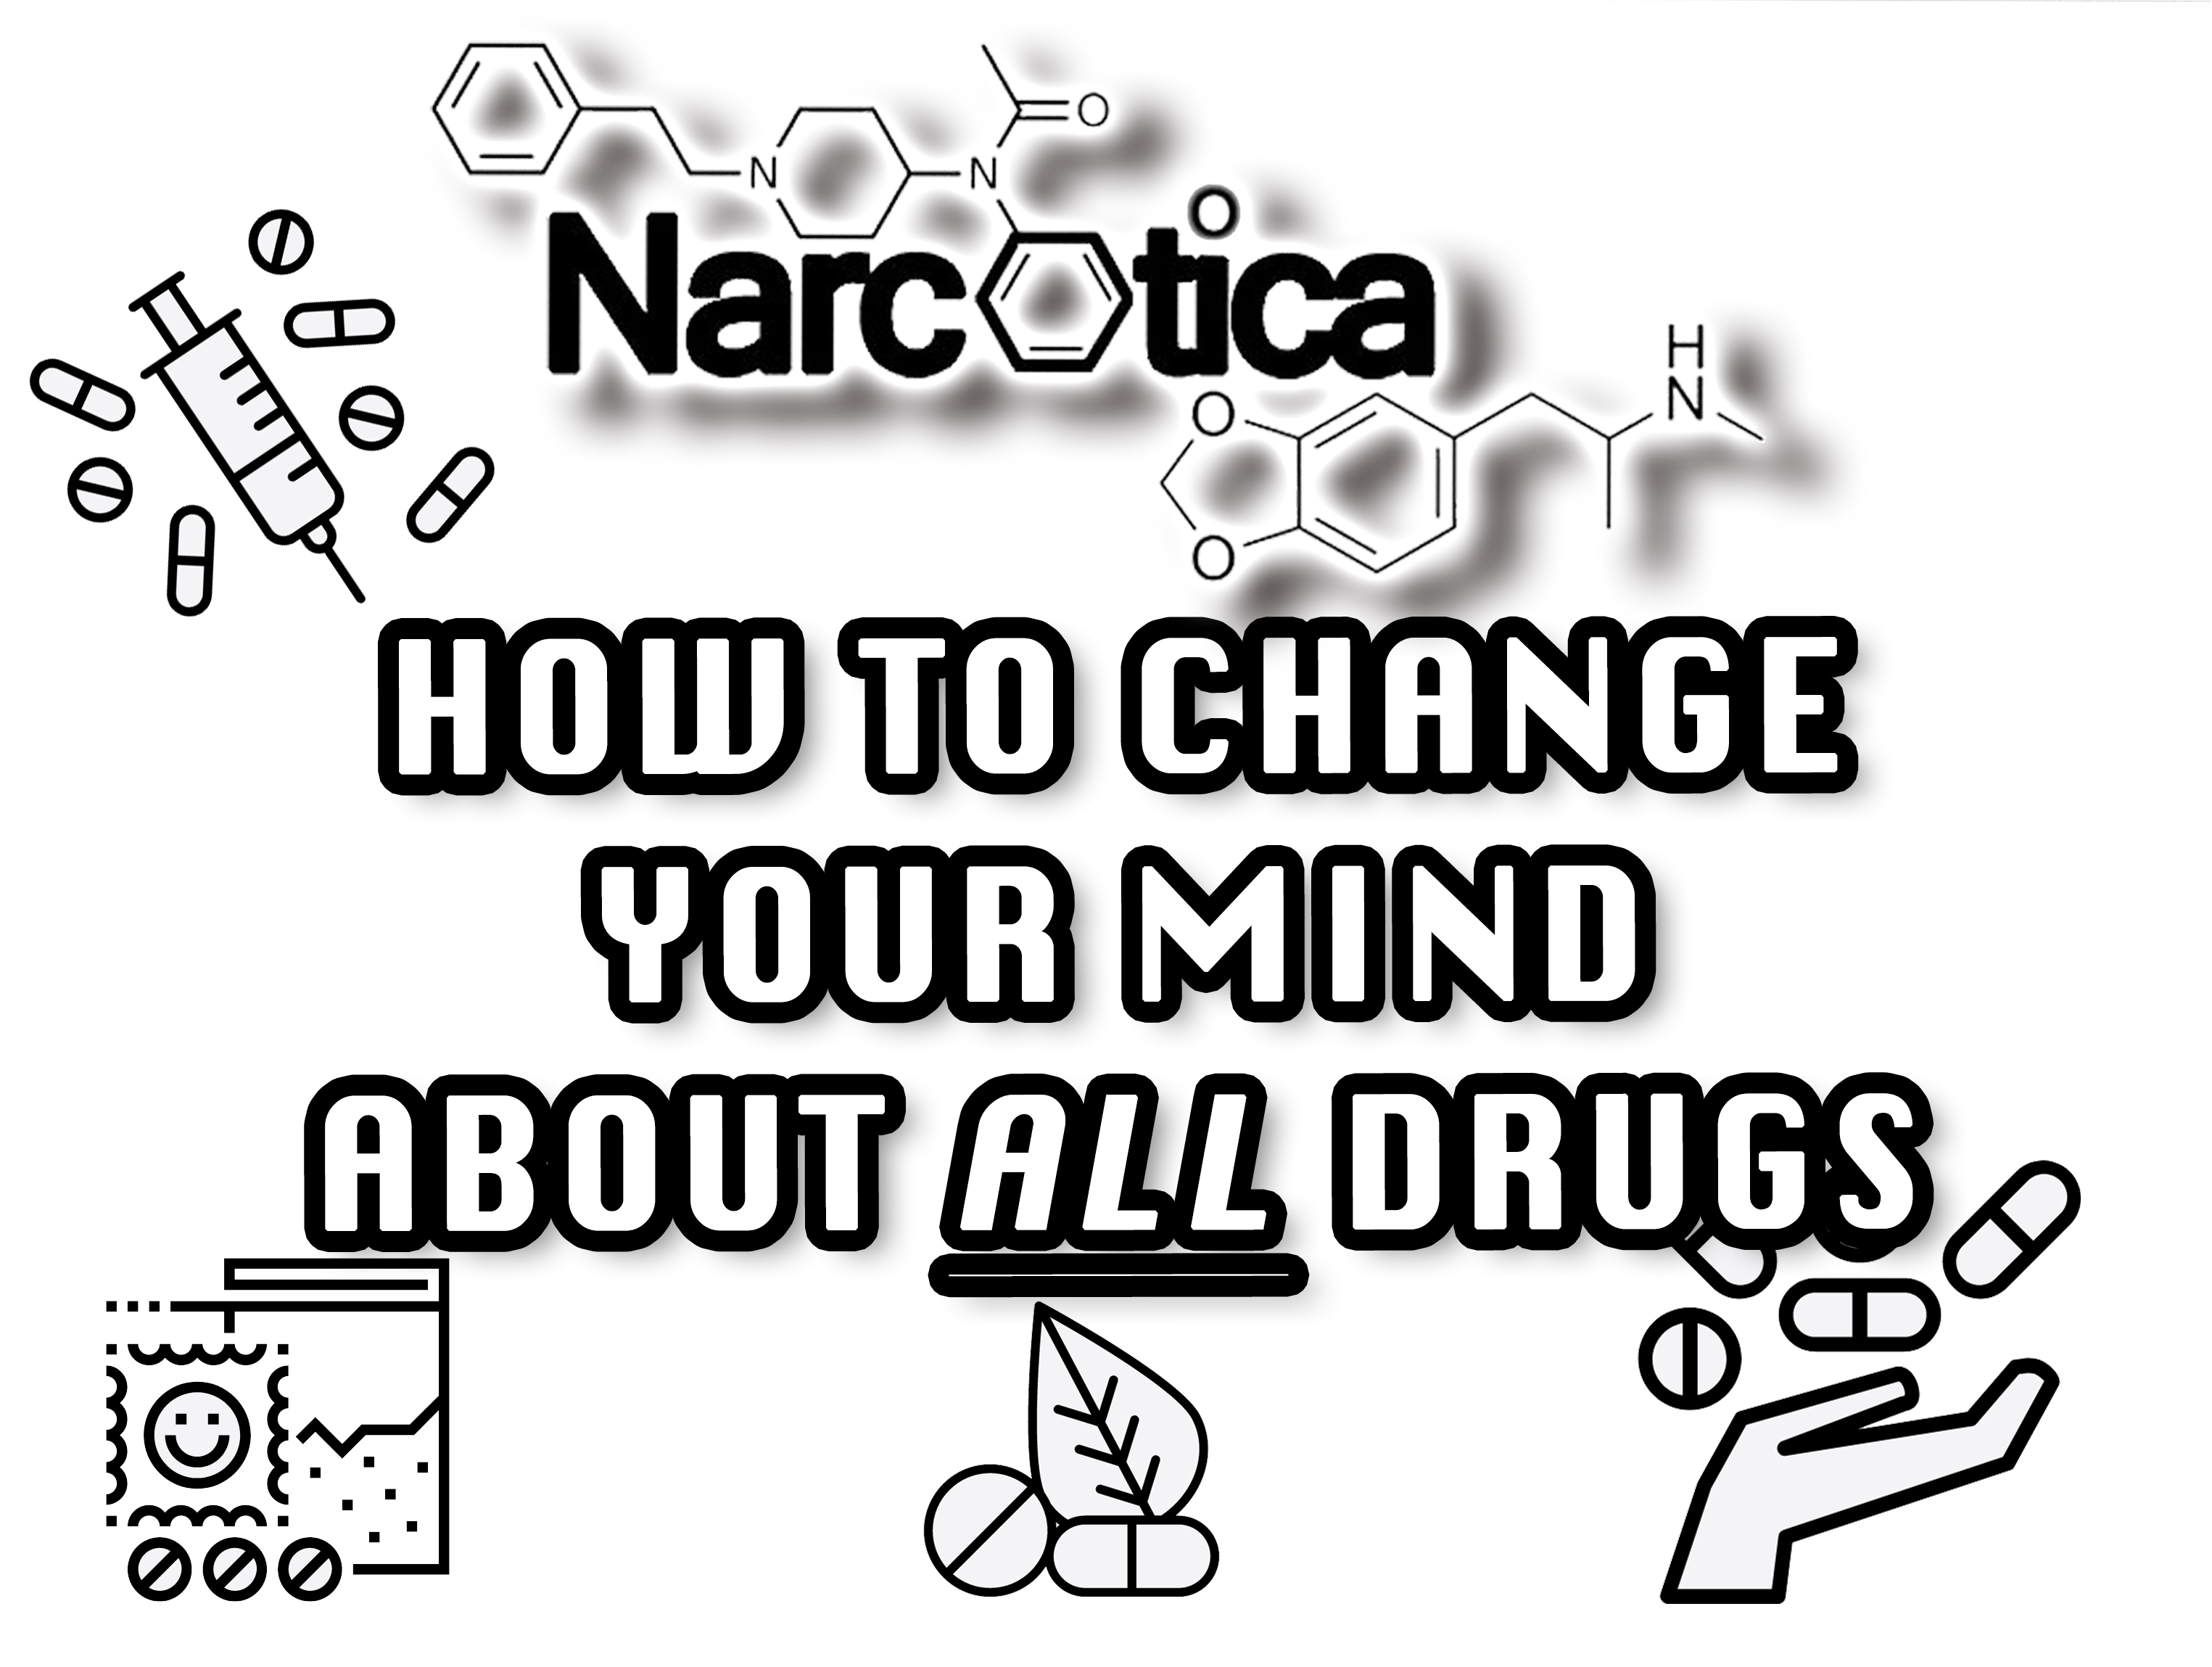 Episode 76: How To Change Your Mind About ALL Drugs with Veronica Wright